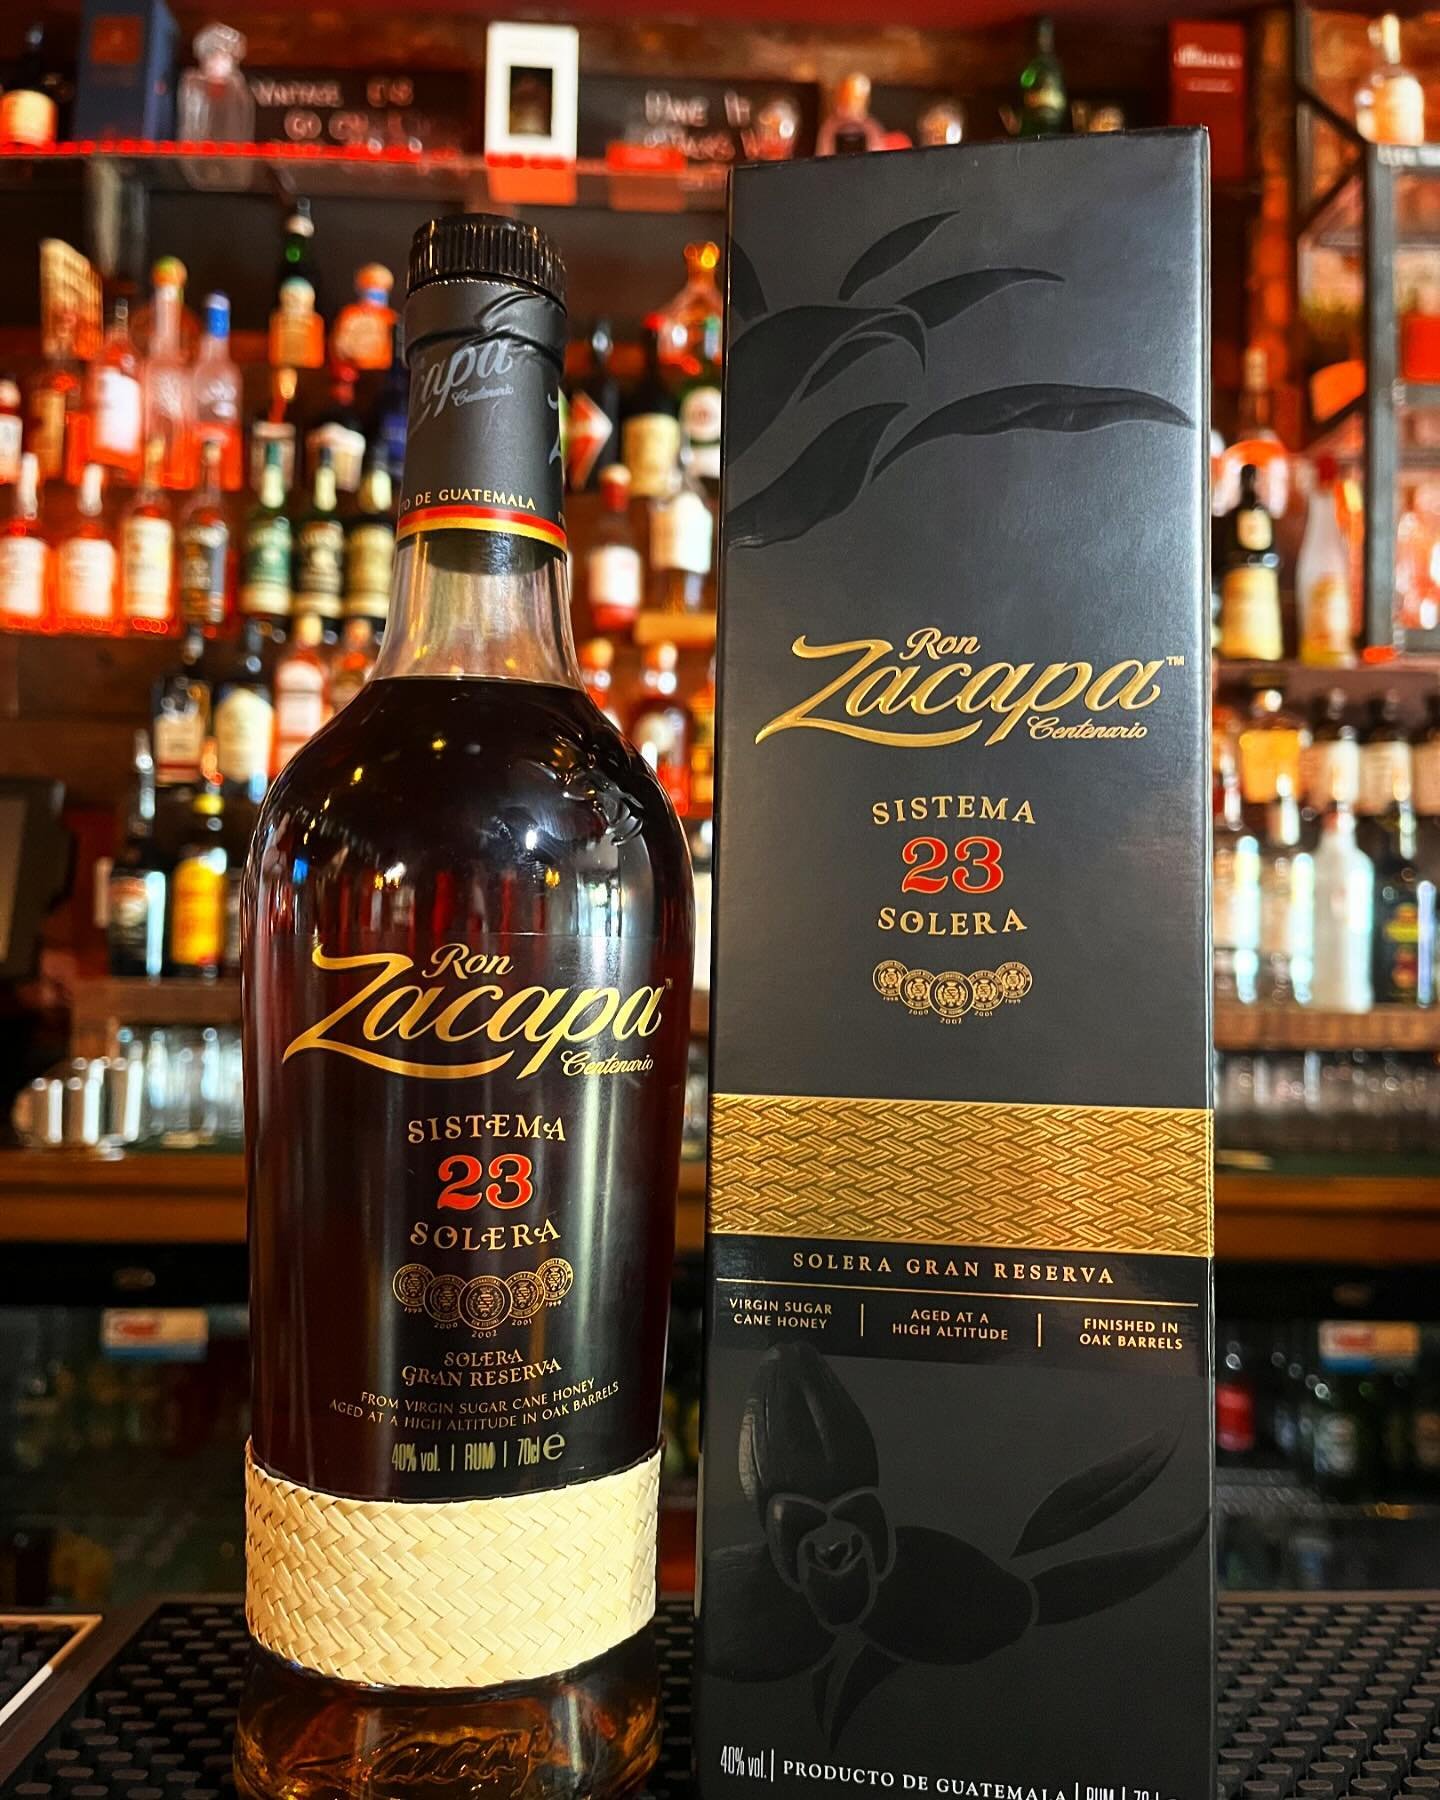 Zacapa is a small town in eastern Guatemala founded in 1876. Aged to perfection in the highlands of Quetzaltenango, Zacapa Rum develops its complex flavour and character 2,300m above sea level in the mystical House Above the Clouds. Wow sounds mystic